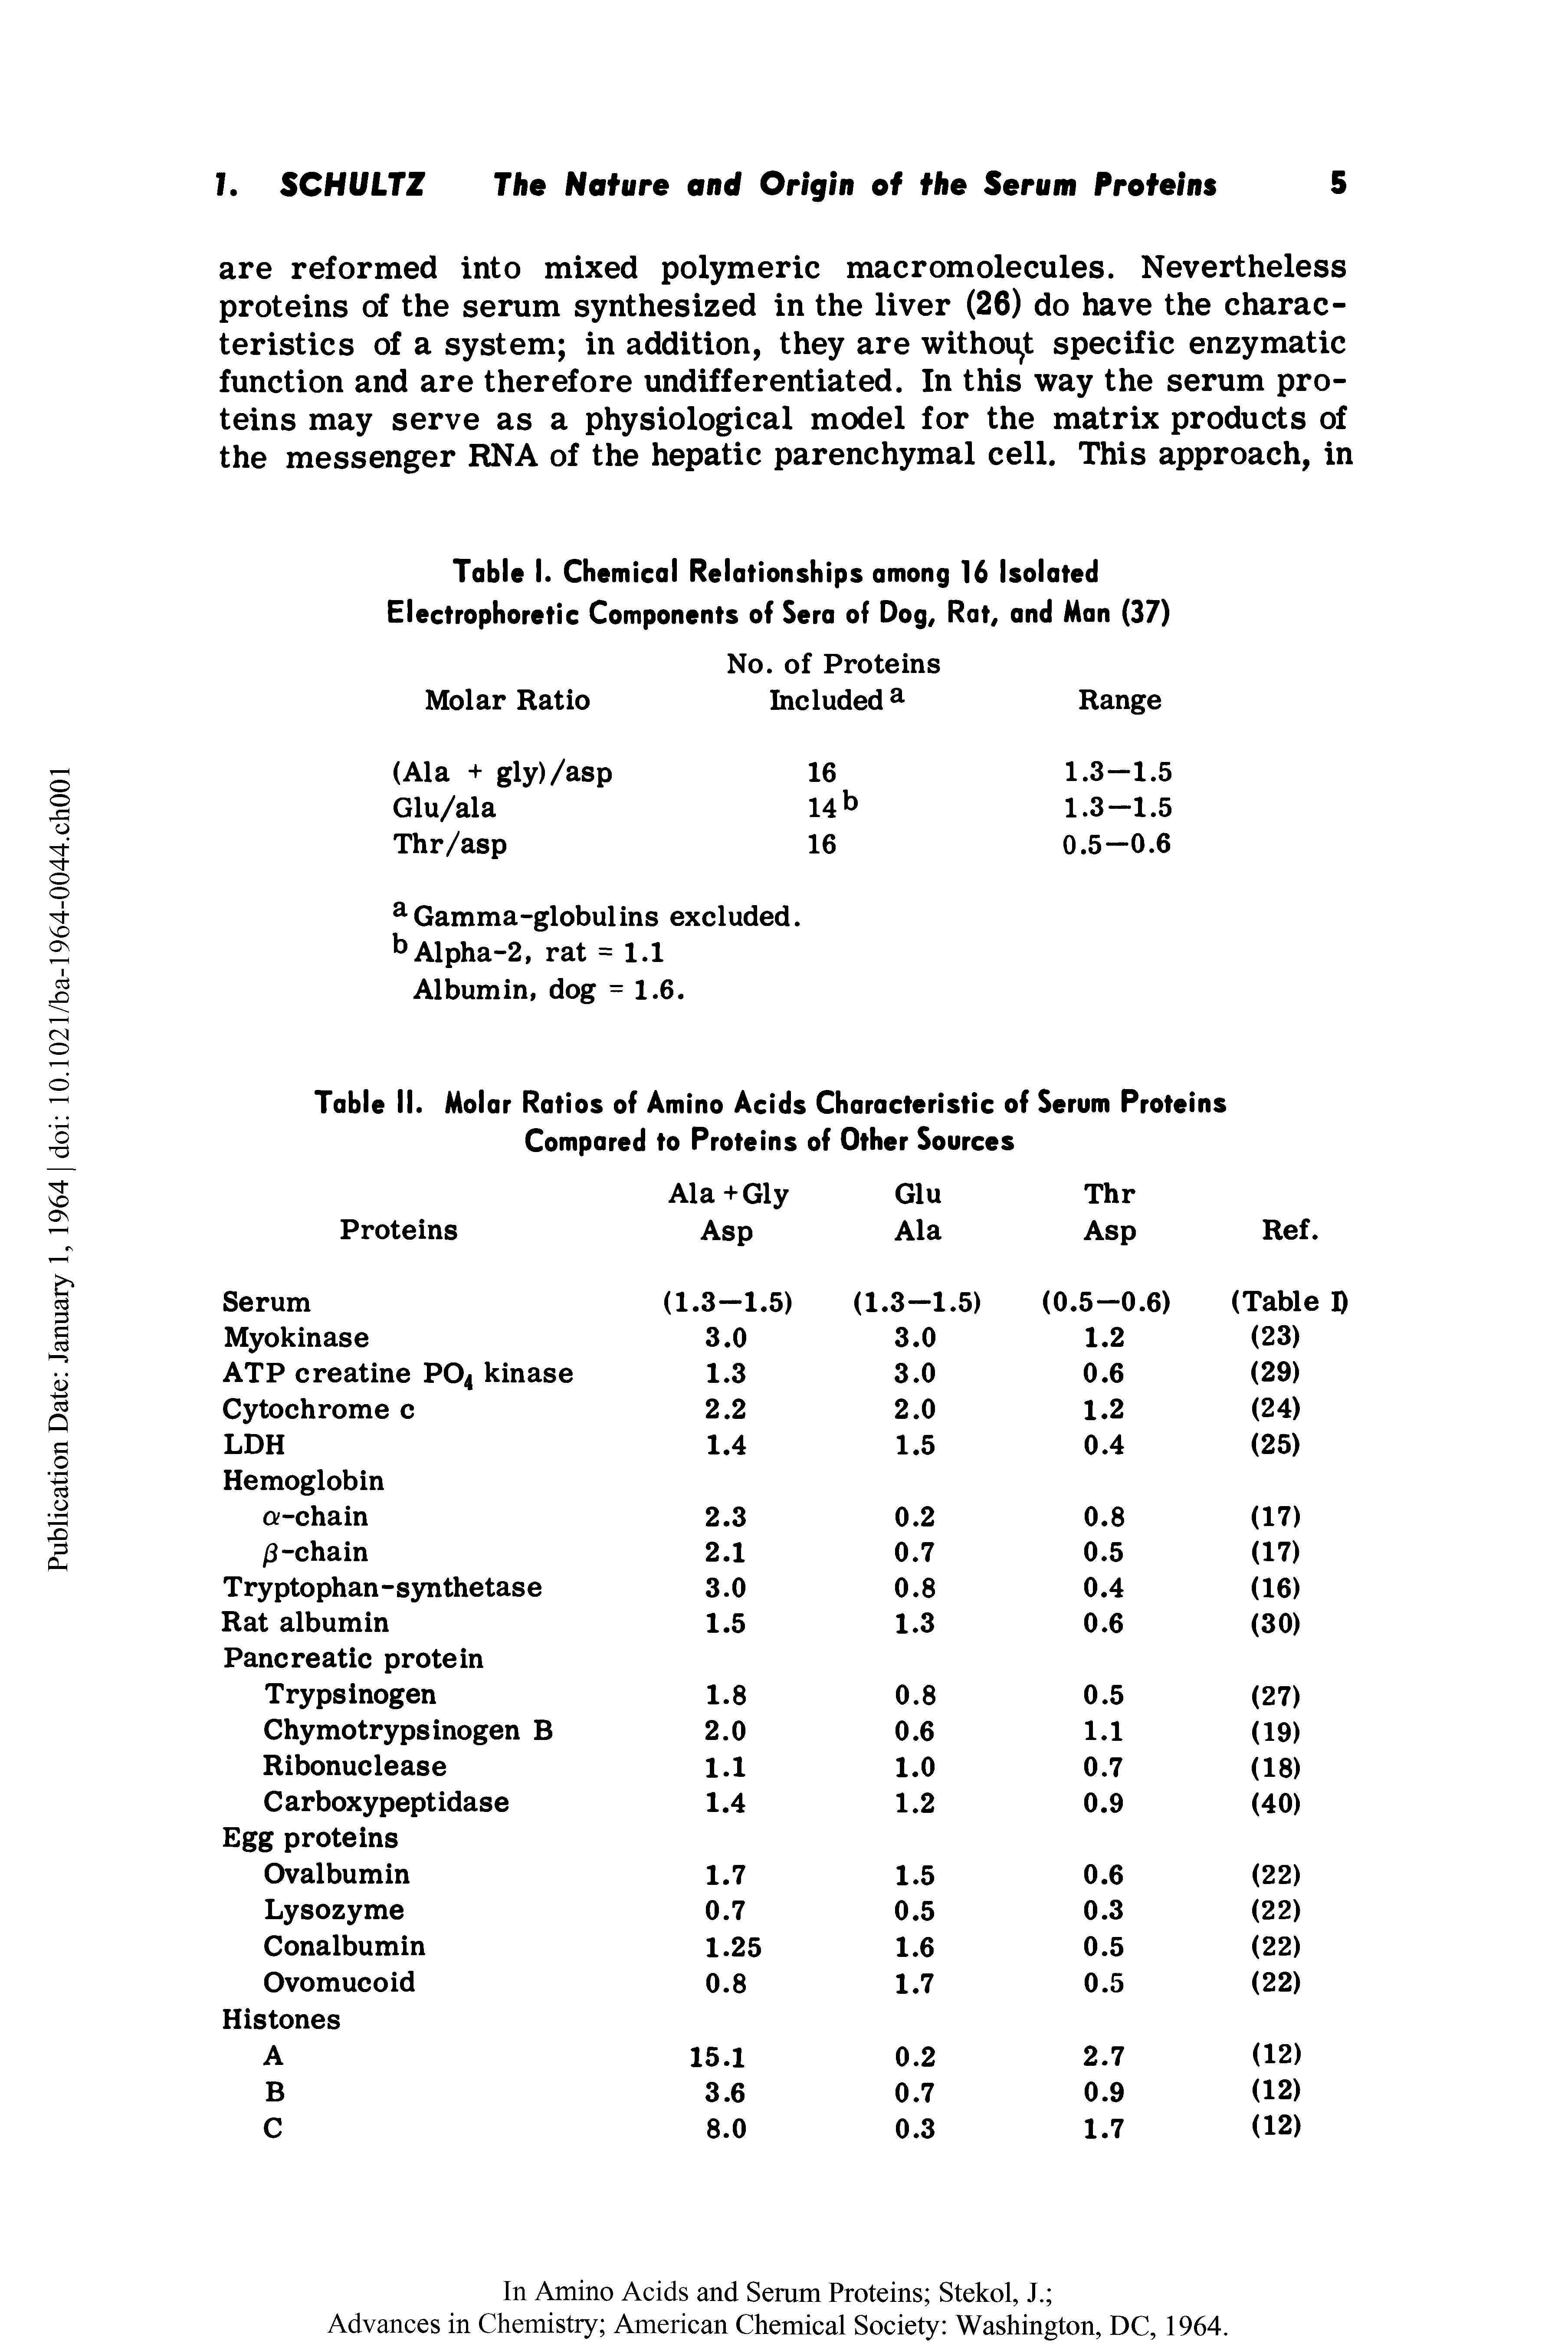 Table I. Chemical Relationships among 16 Isolated Electrophoretic Components of Sera of Dog, Rat, and Man (37)...